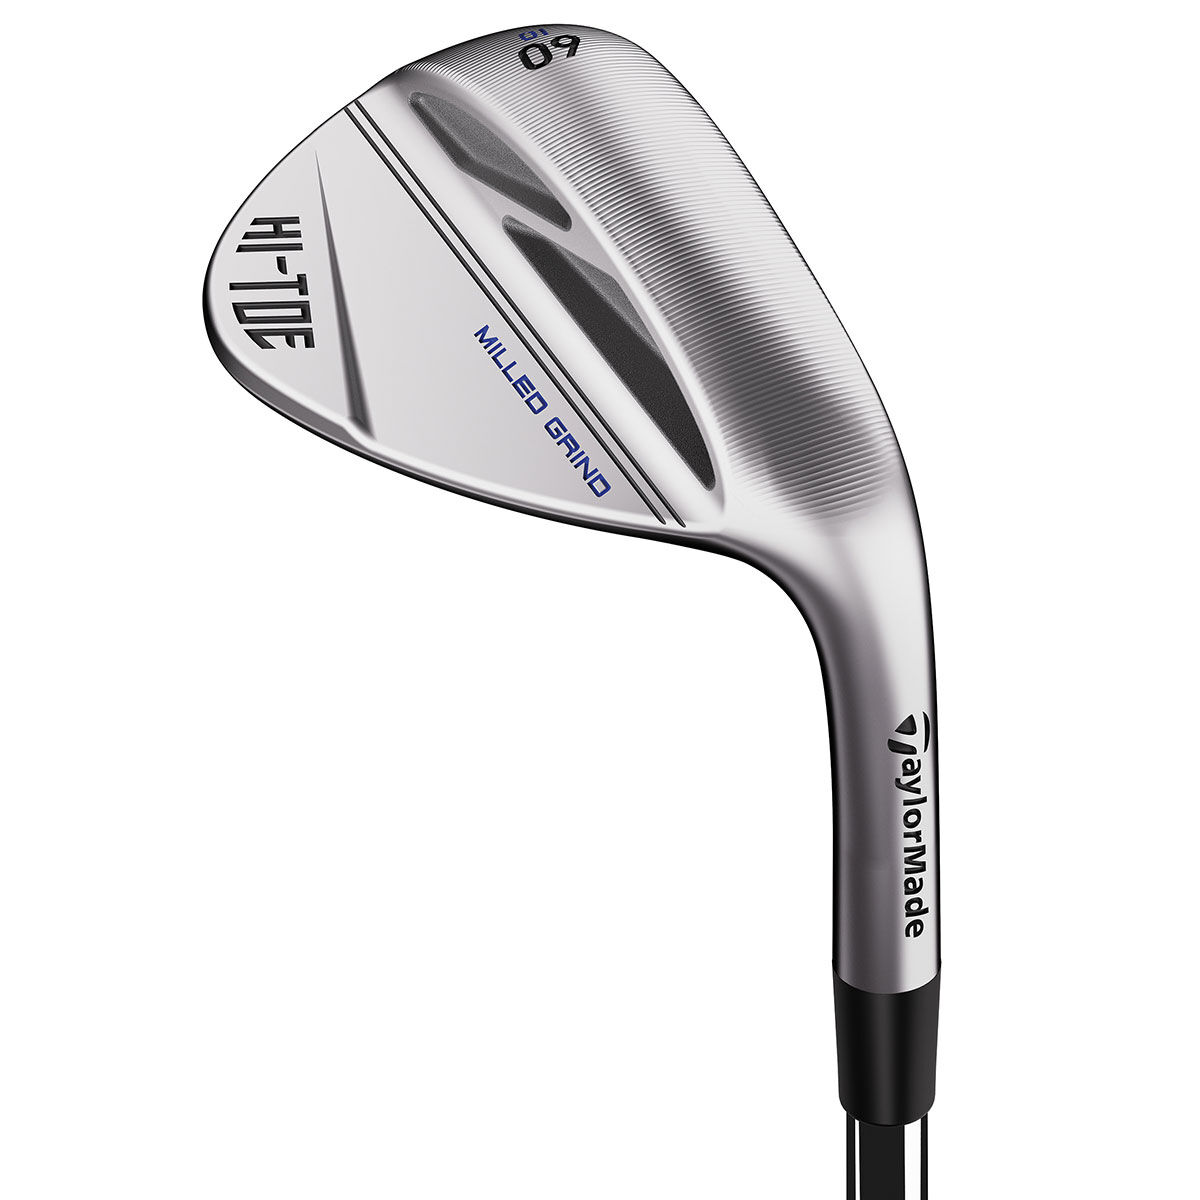 TaylorMade Men's Grey and Black Hi-Toe 3 Chrome Steel Right Hand Golf Wedge, Size: 58° | American Golf von TaylorMade